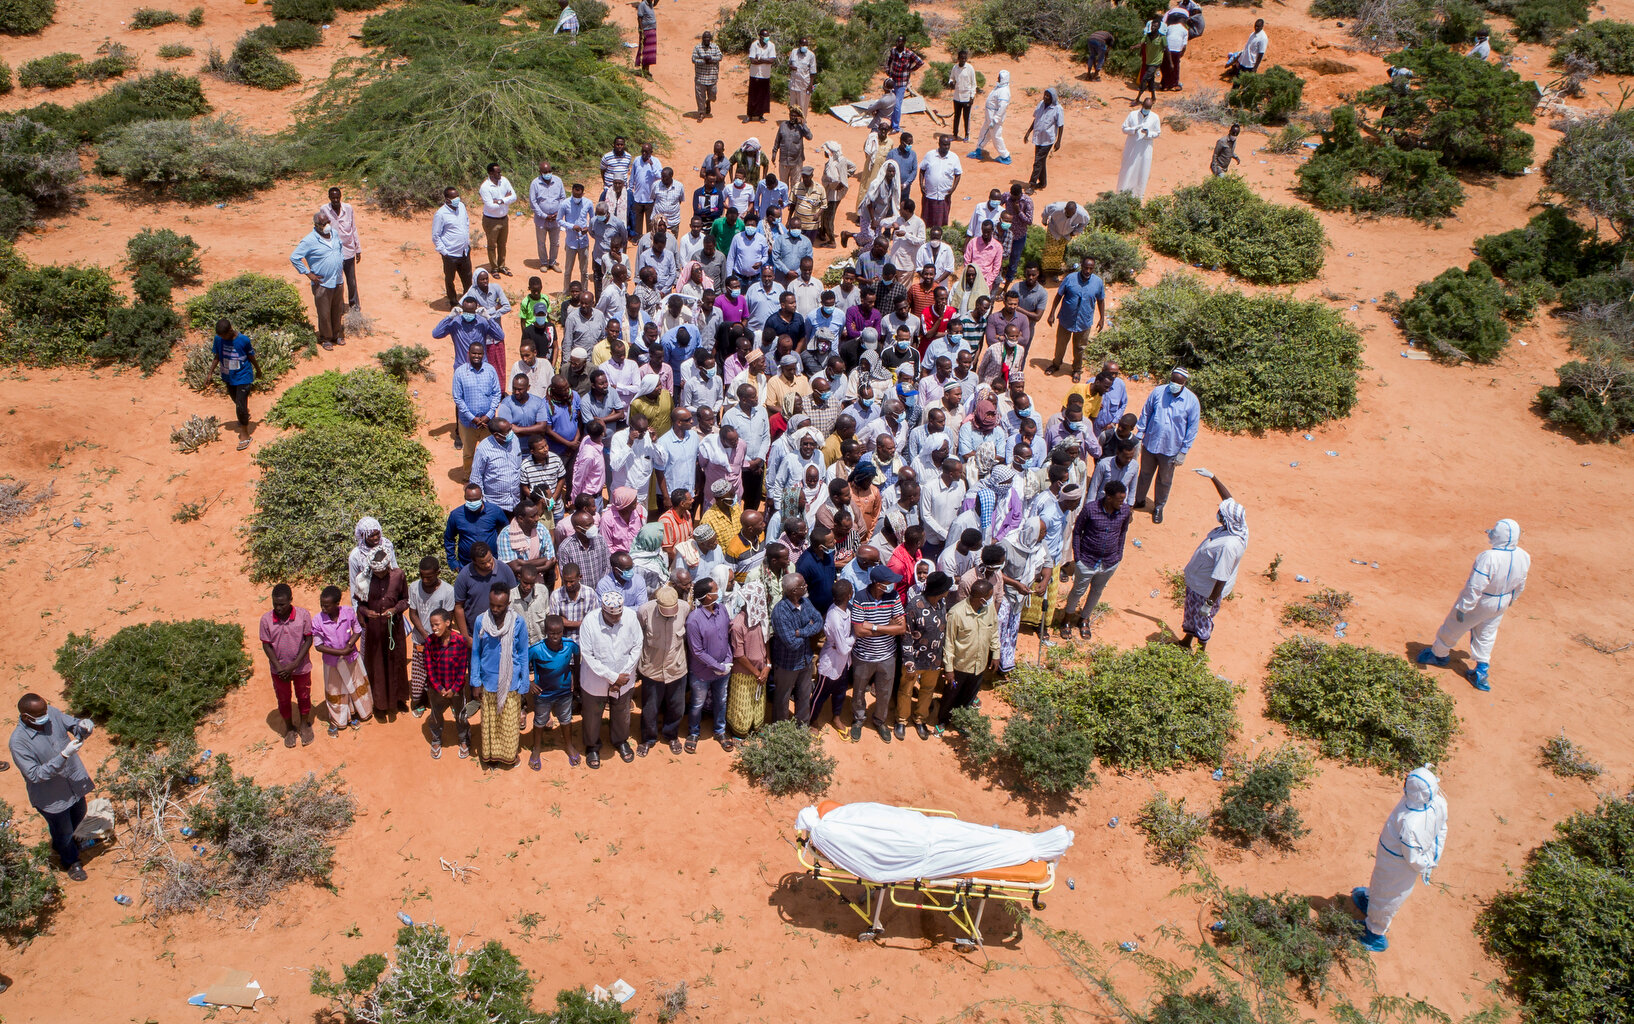  In this photo taken Thursday, April 30, 2020, mourners gather to bury an elderly man believed to have died of the coronavirus in Mogadishu, Somalia. Years of conflict, instability and poverty have left Somalia ill-equipped to handle a health crisis 